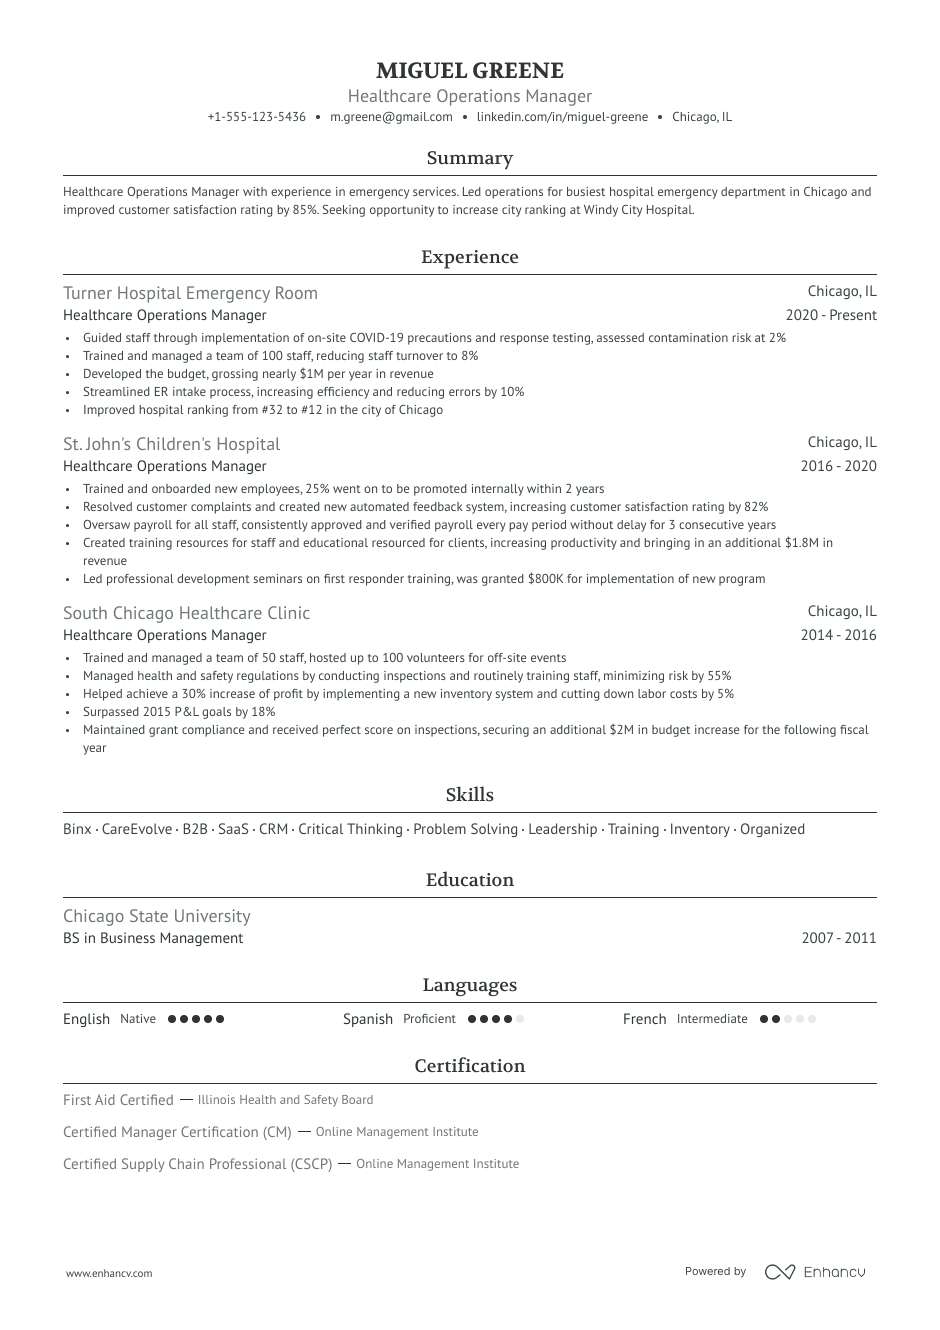 Healthcare operations manager resume example